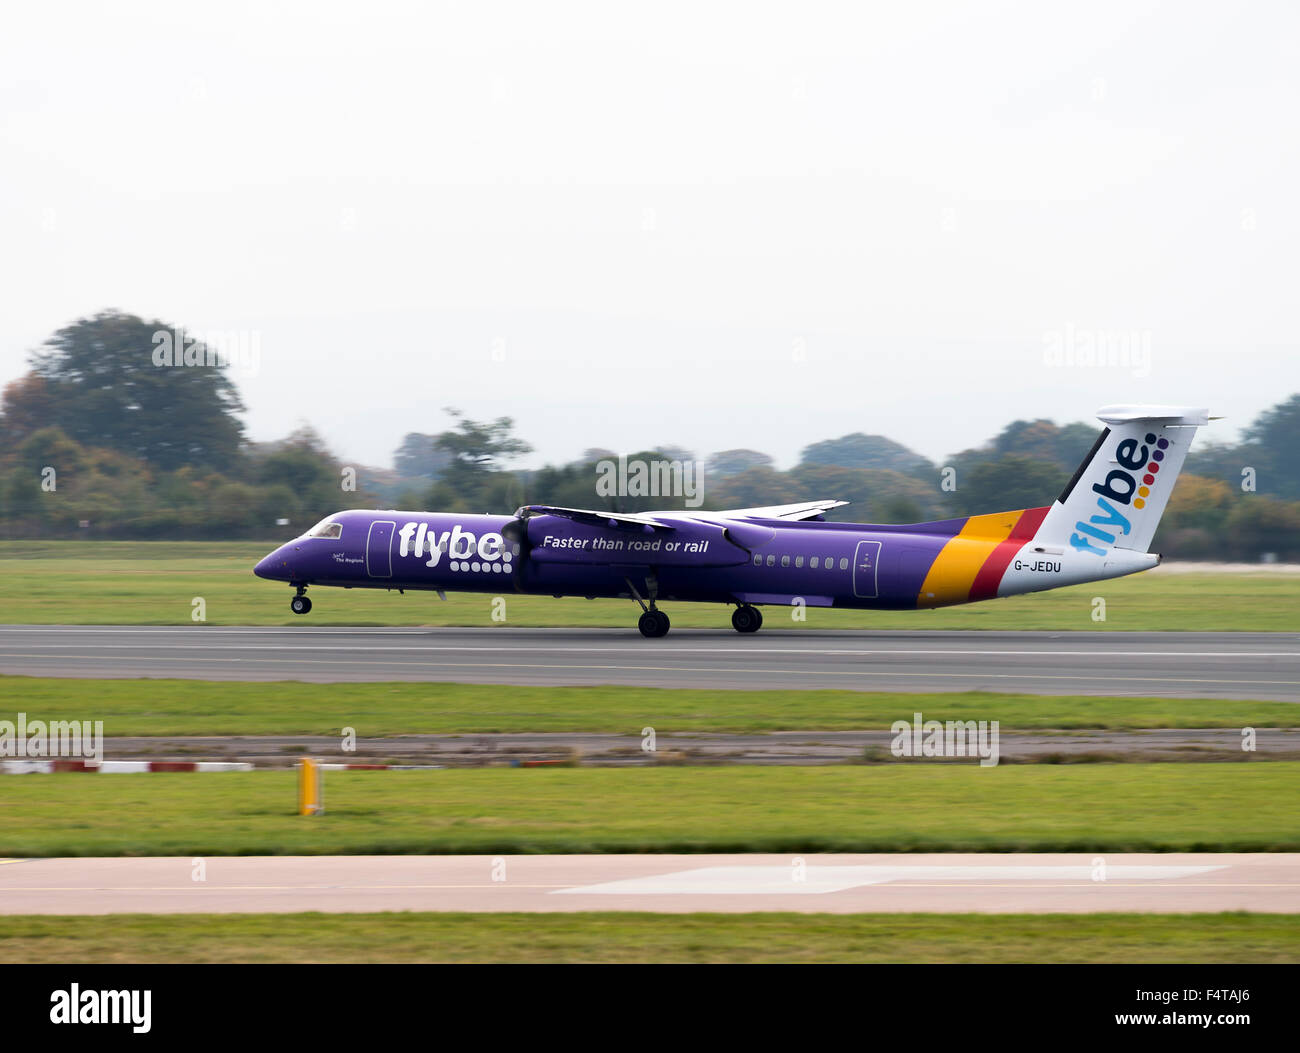 Flybe Airline Bombardier Dash8-Q400 Airliner G-JEDU Taking Off at Manchester Airport England United Kingdom UK Stock Photo